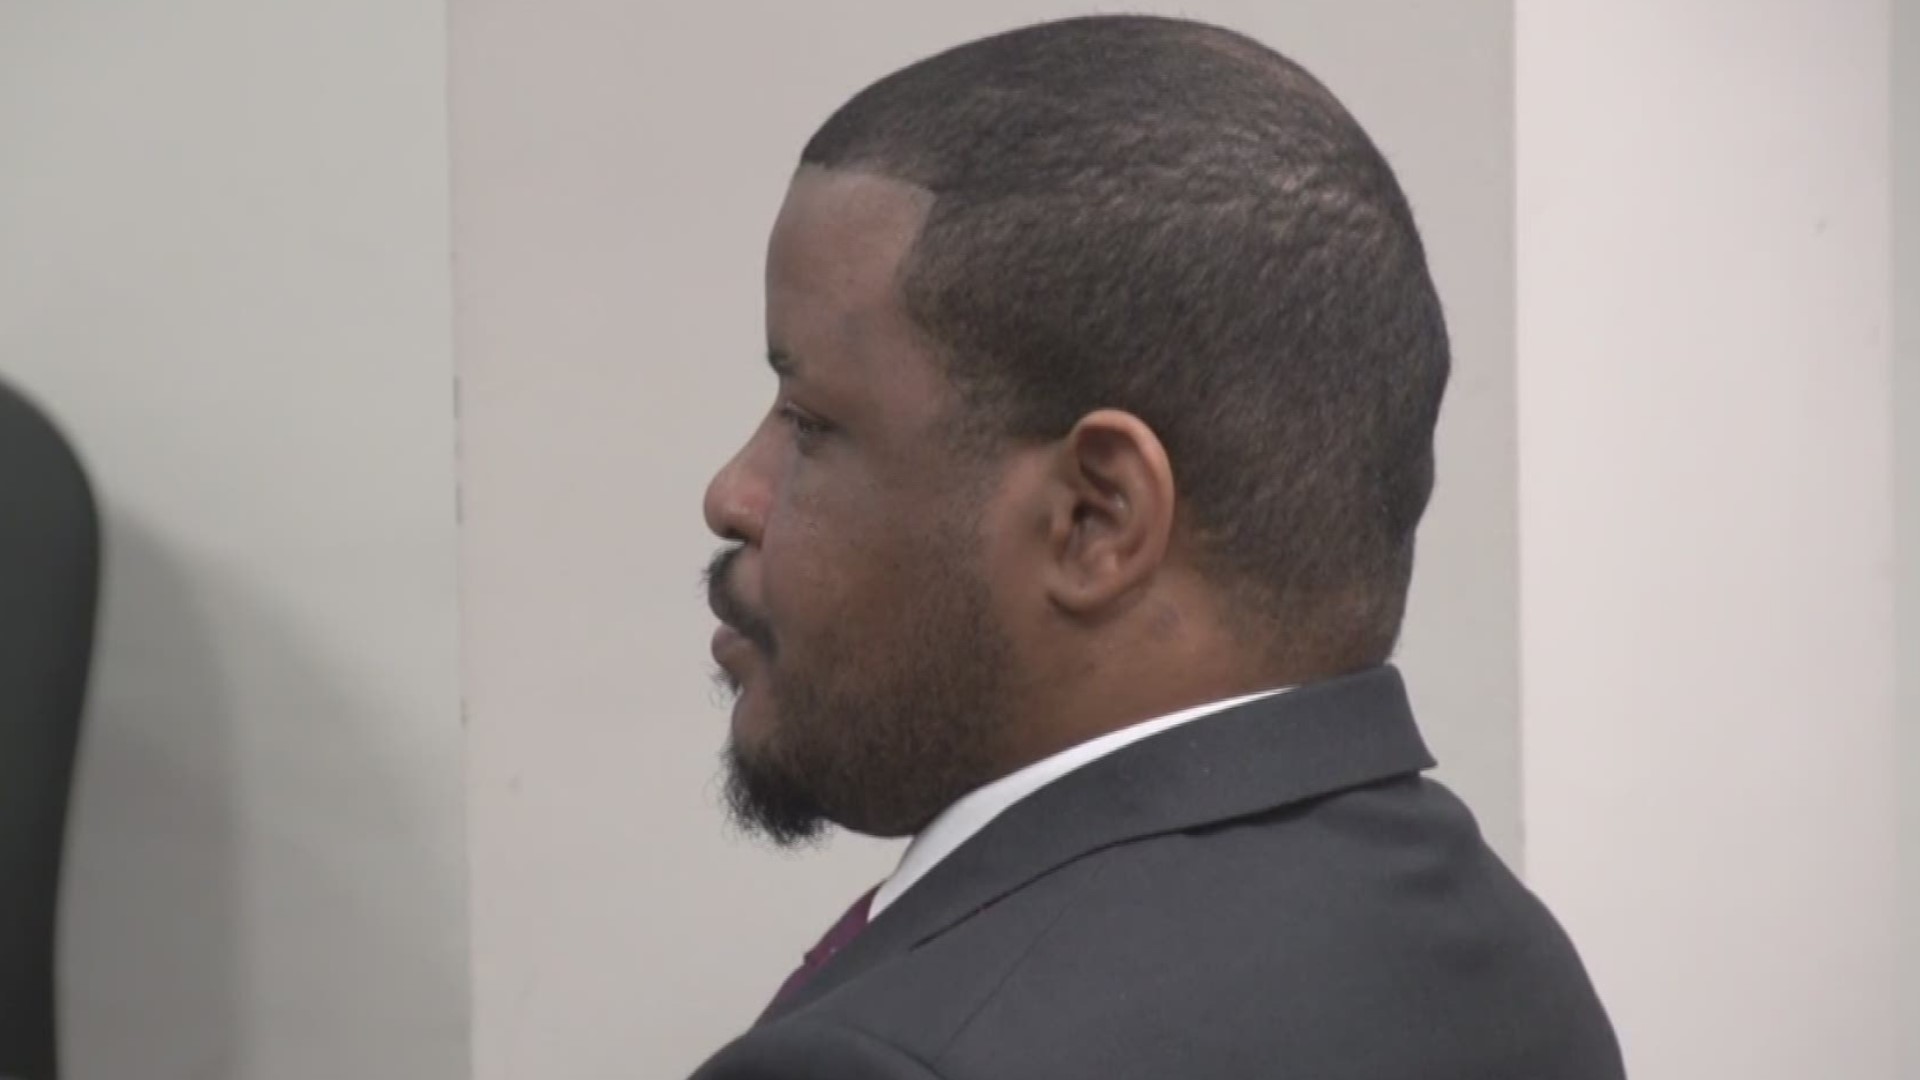 Opening statements are set to begin Friday in the trial of Granville Ritchie, the man accused of beating and strangling a 9-year-old girl in May 2014.

Ritchie, 40, could face the death penalty if convicted in the murder of Felecia Williams. Jurors first will have to decide whether he is guilty and would have to be unanimous in sentencing him to death.